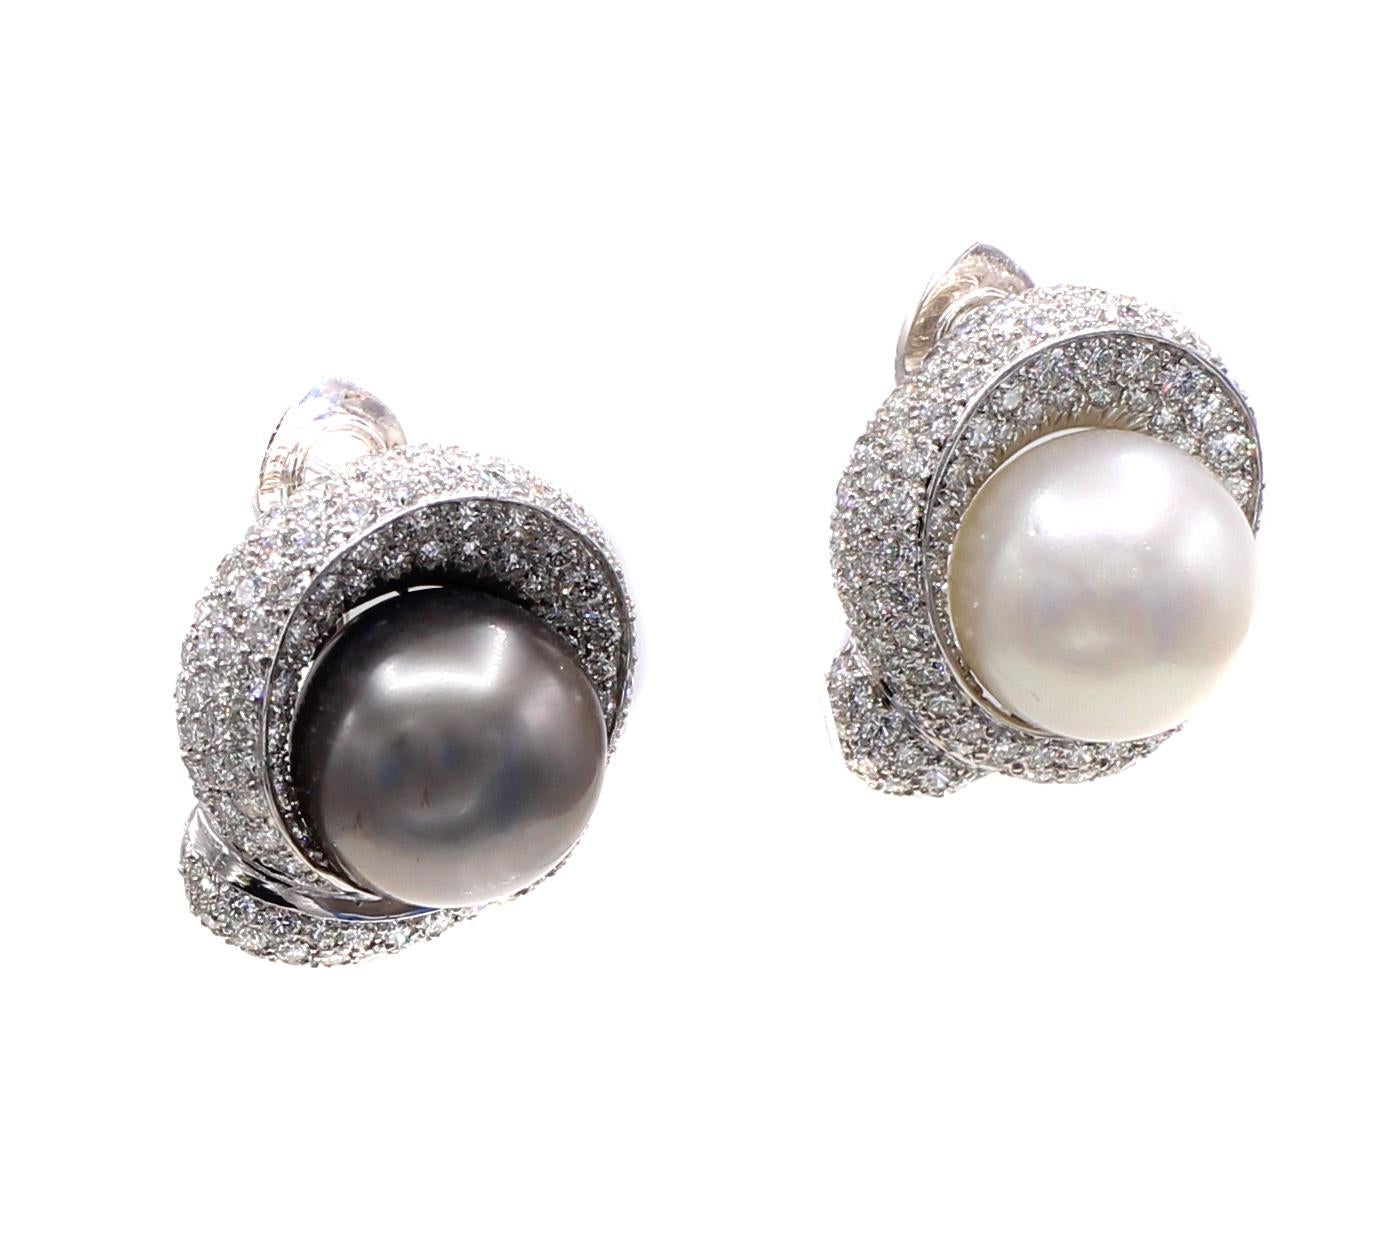 Beautifully designed and masterfully handcrafted these platinum stylish and chic ear clips feature a natural black and white south sea pearl measuring approximately 16 millimeters each. Both pearls show a wonderful luster and shape. Surrounding them